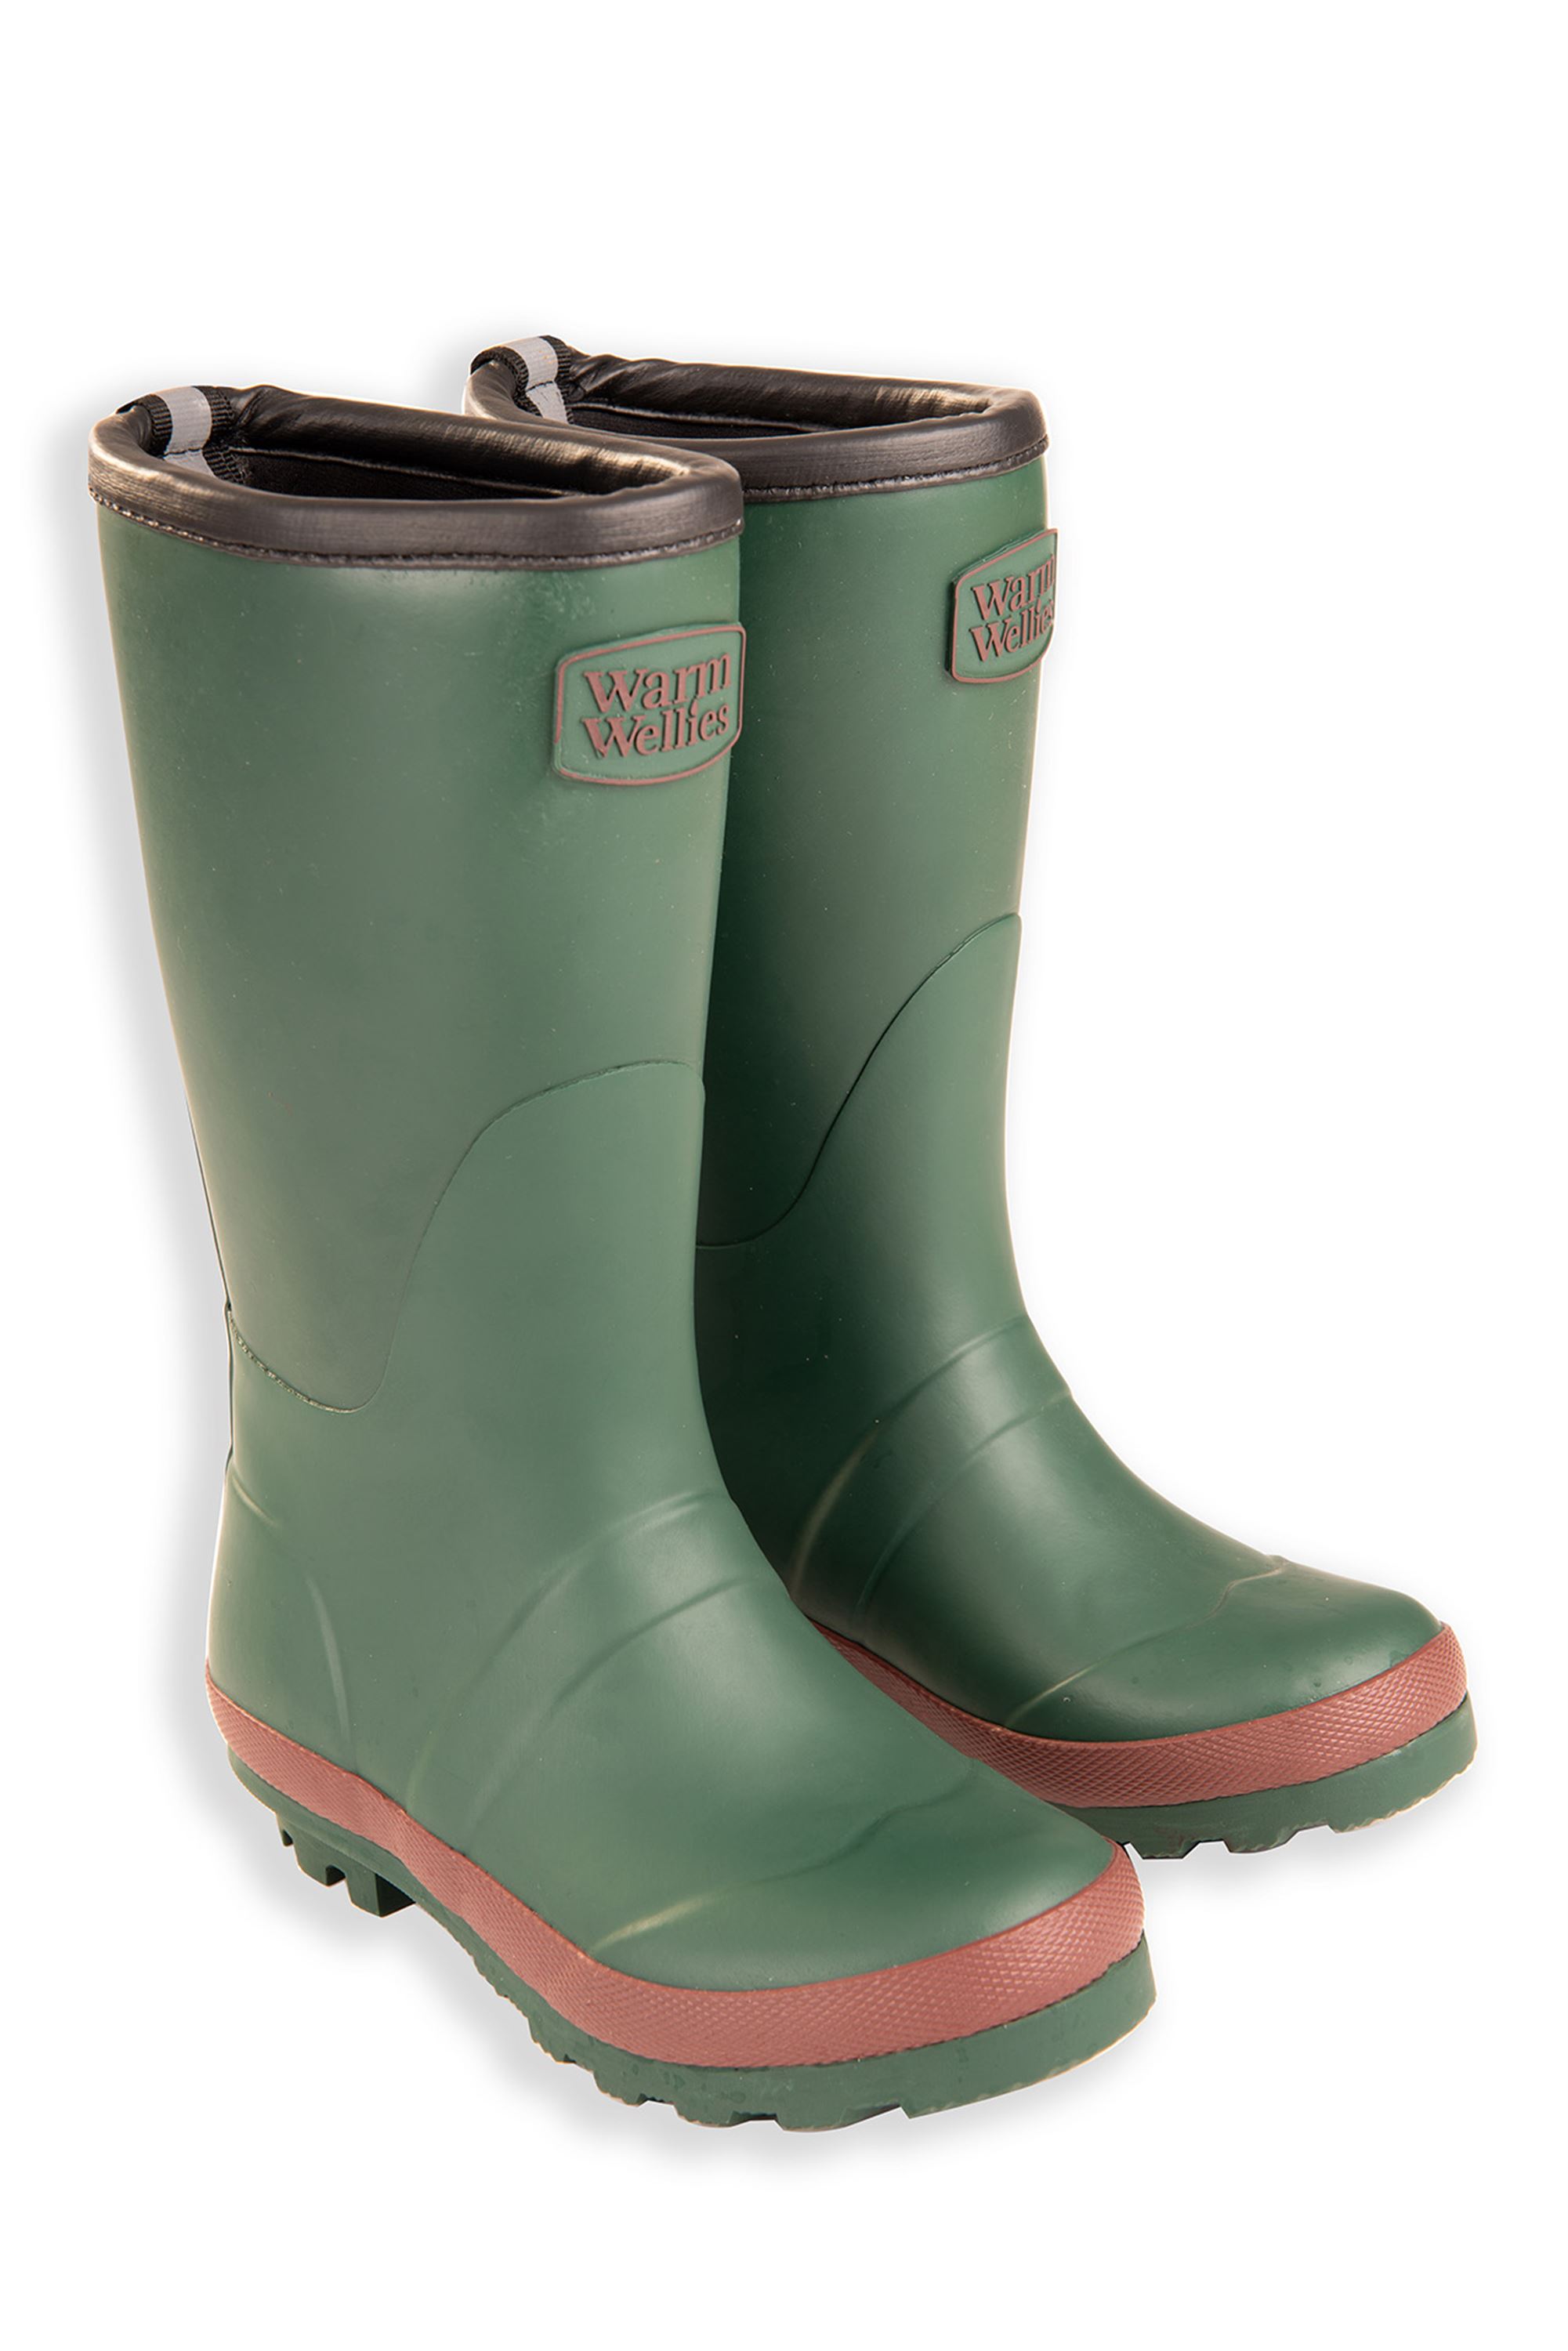 infant size 1 wellies